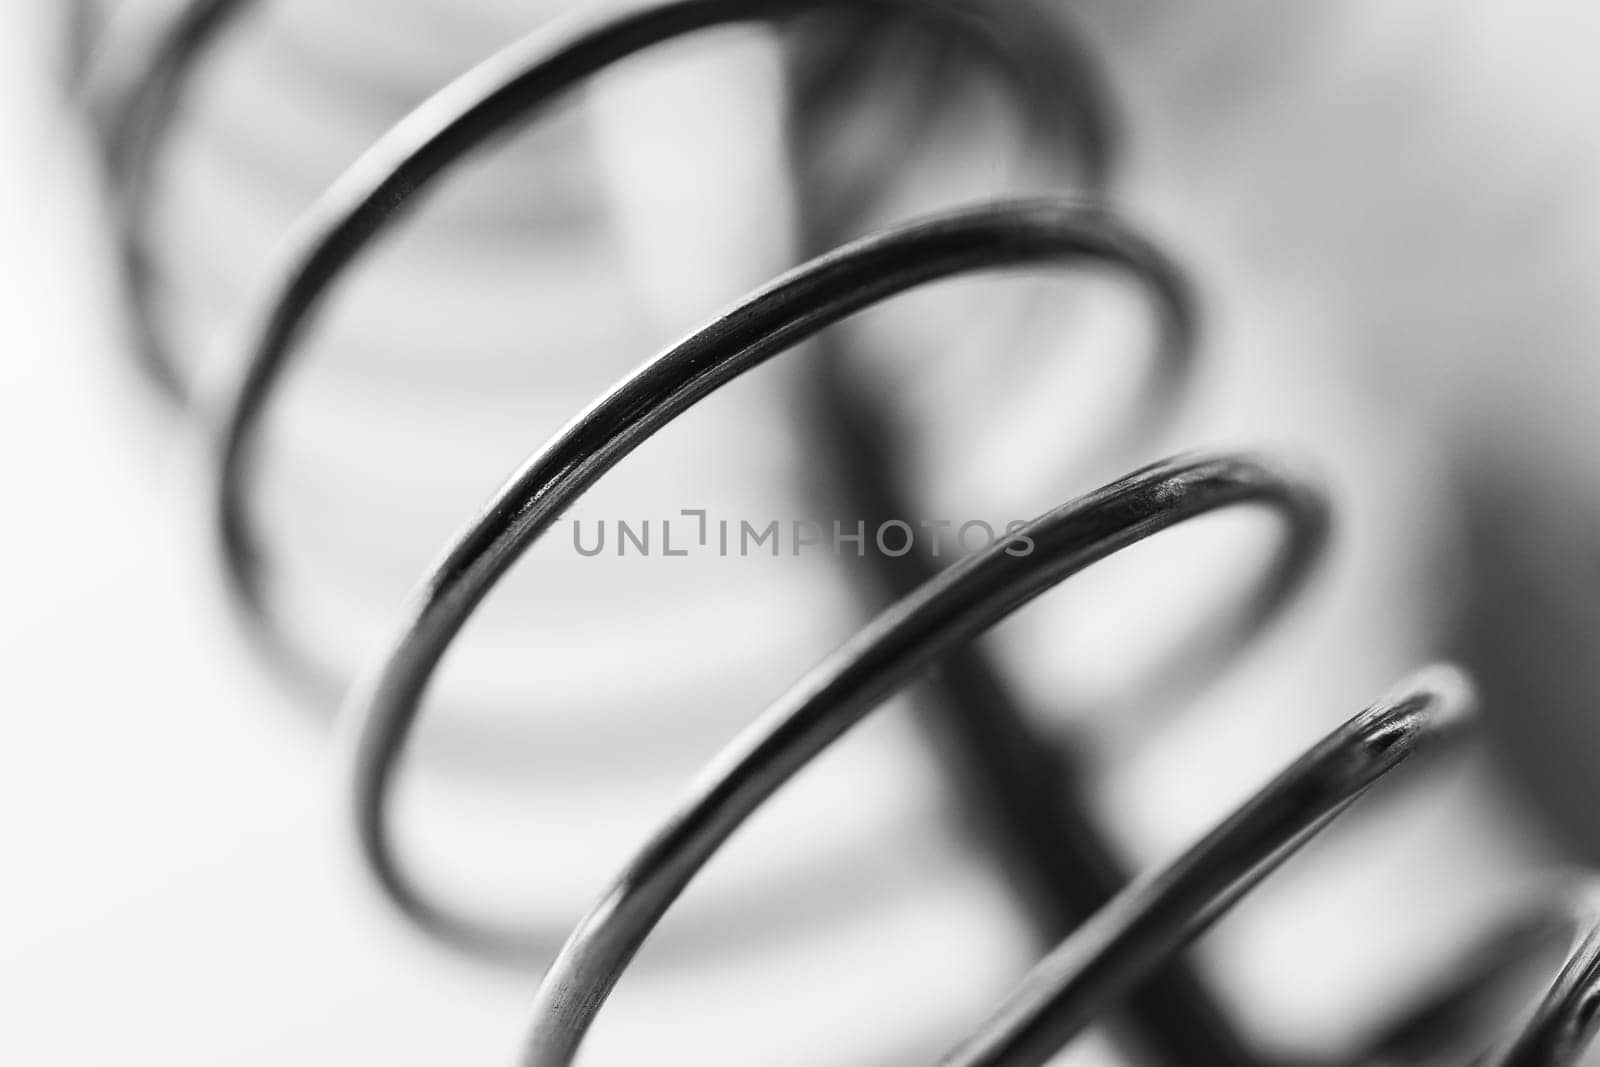 Metal spring coiled, black and white macro shot by clusterx